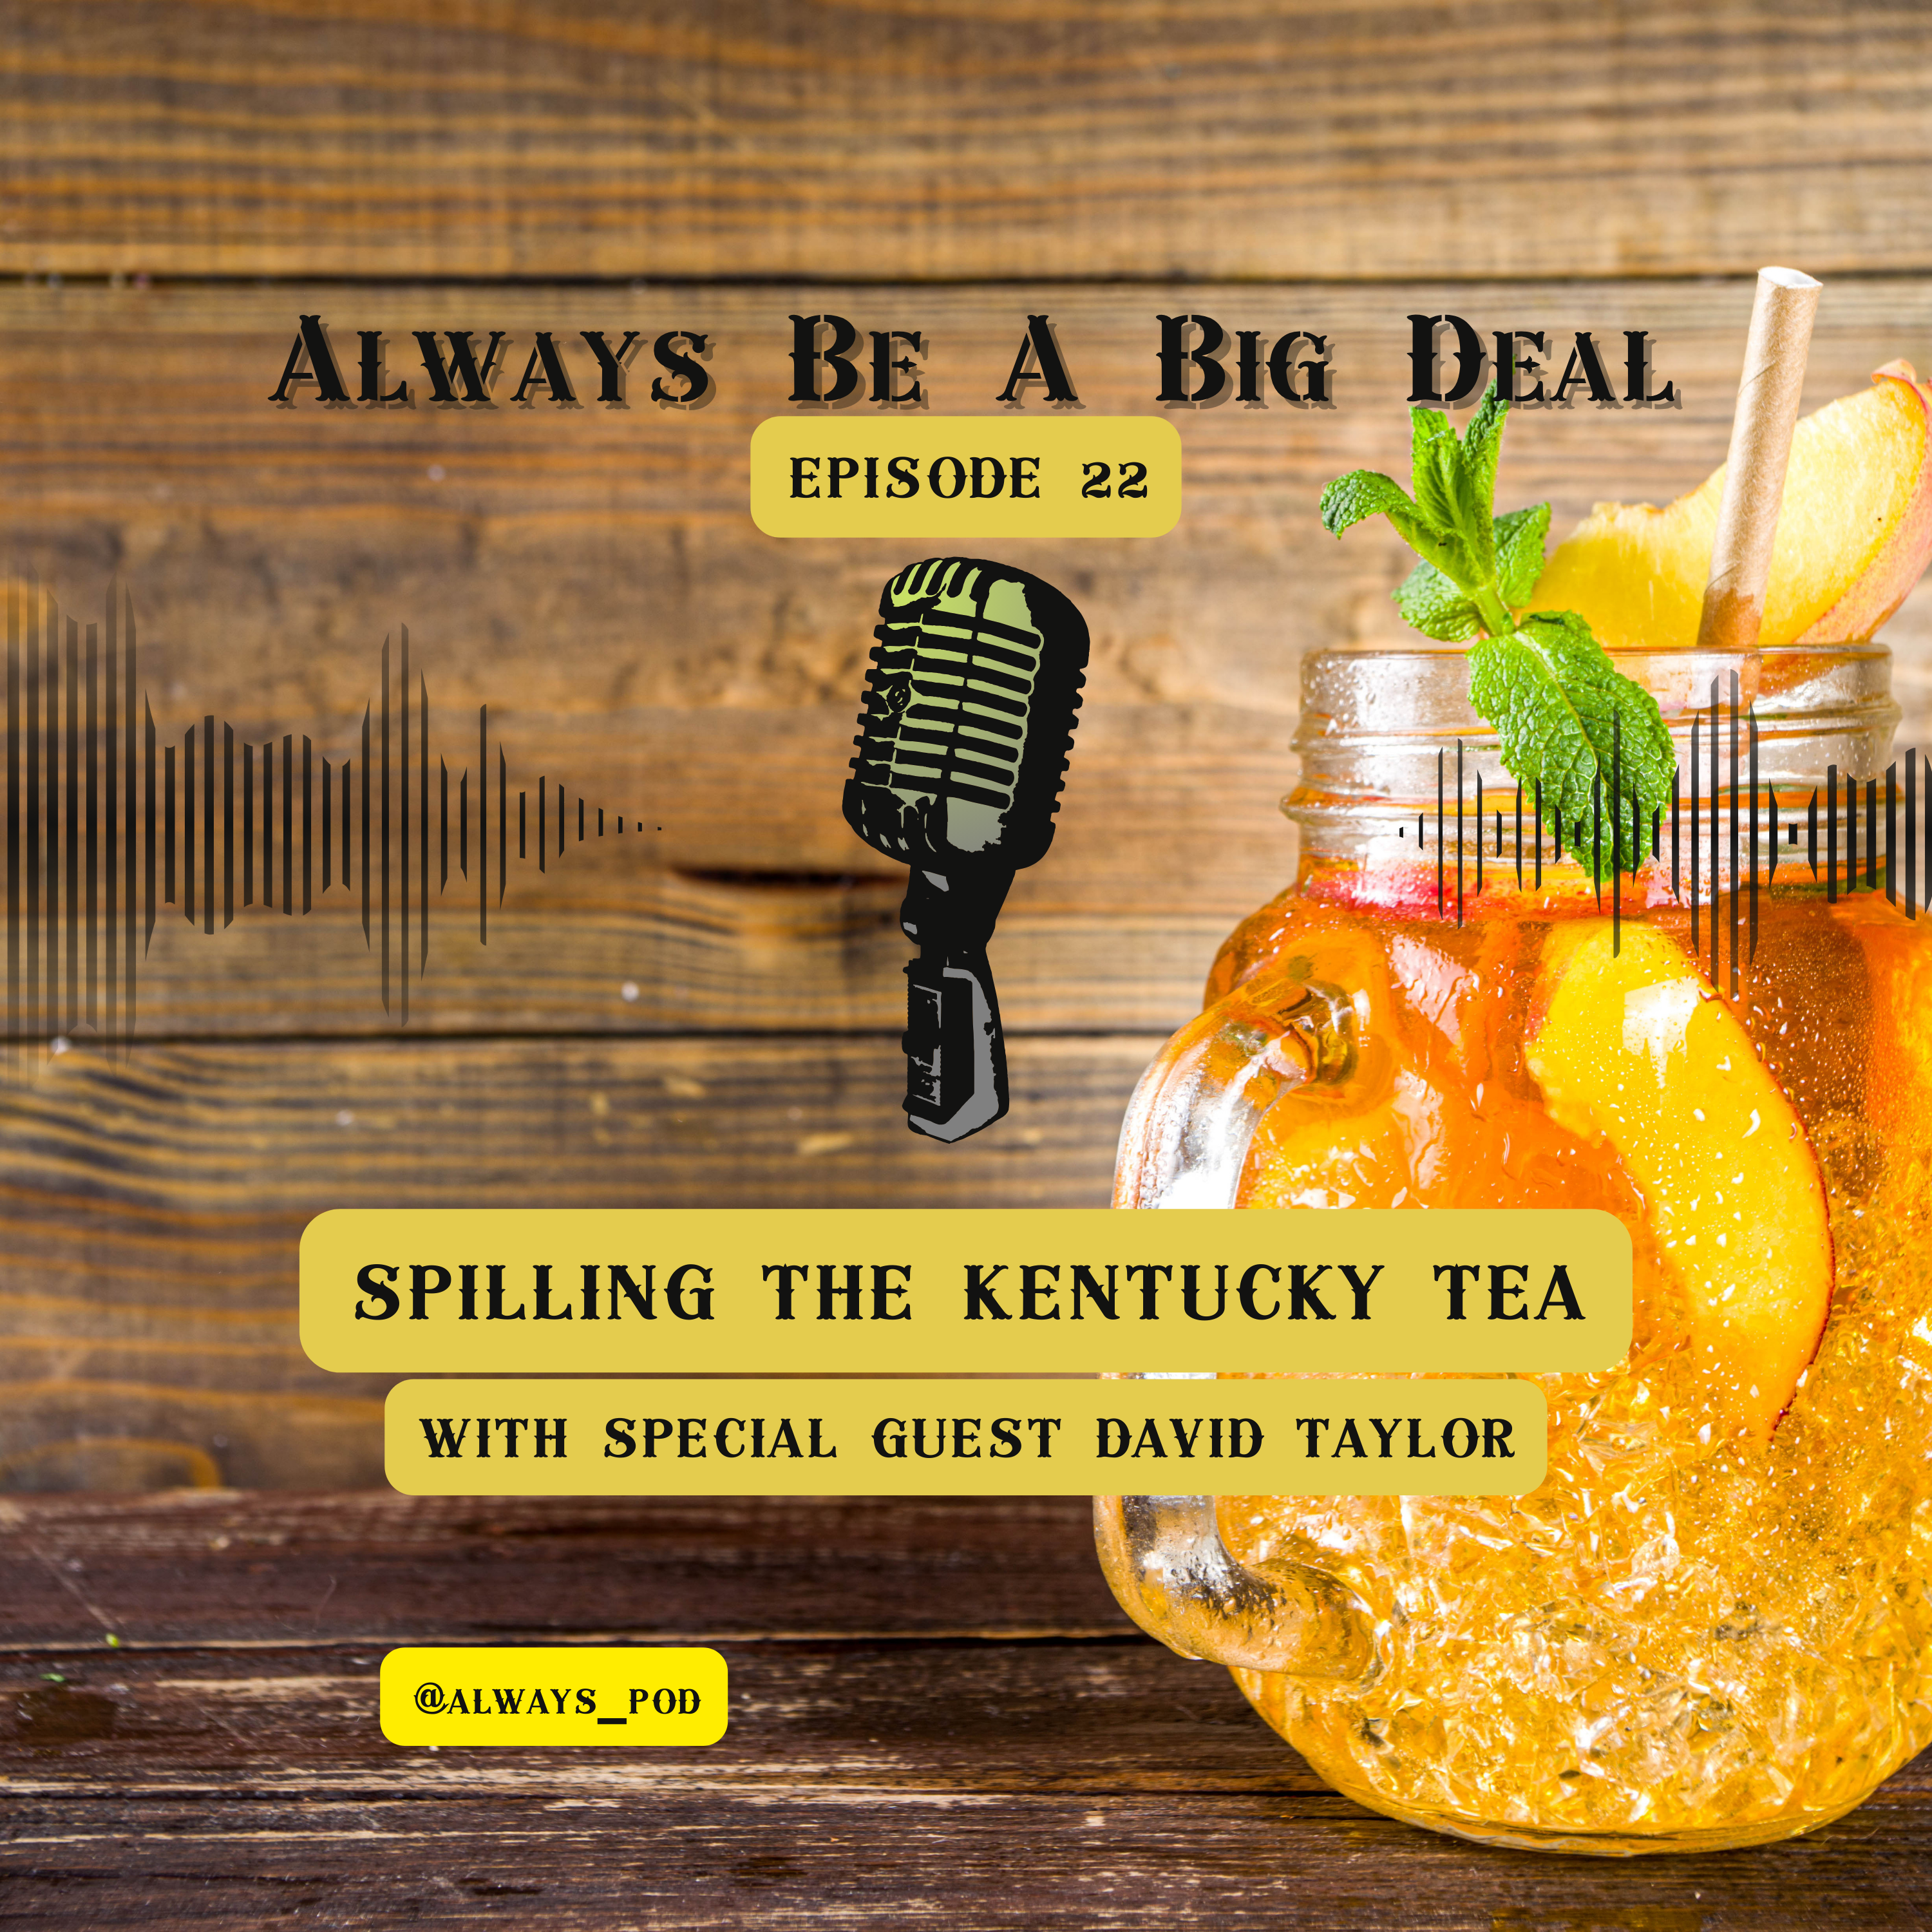 Episode 22 - Spilling the Kentucky Tea with David Taylor